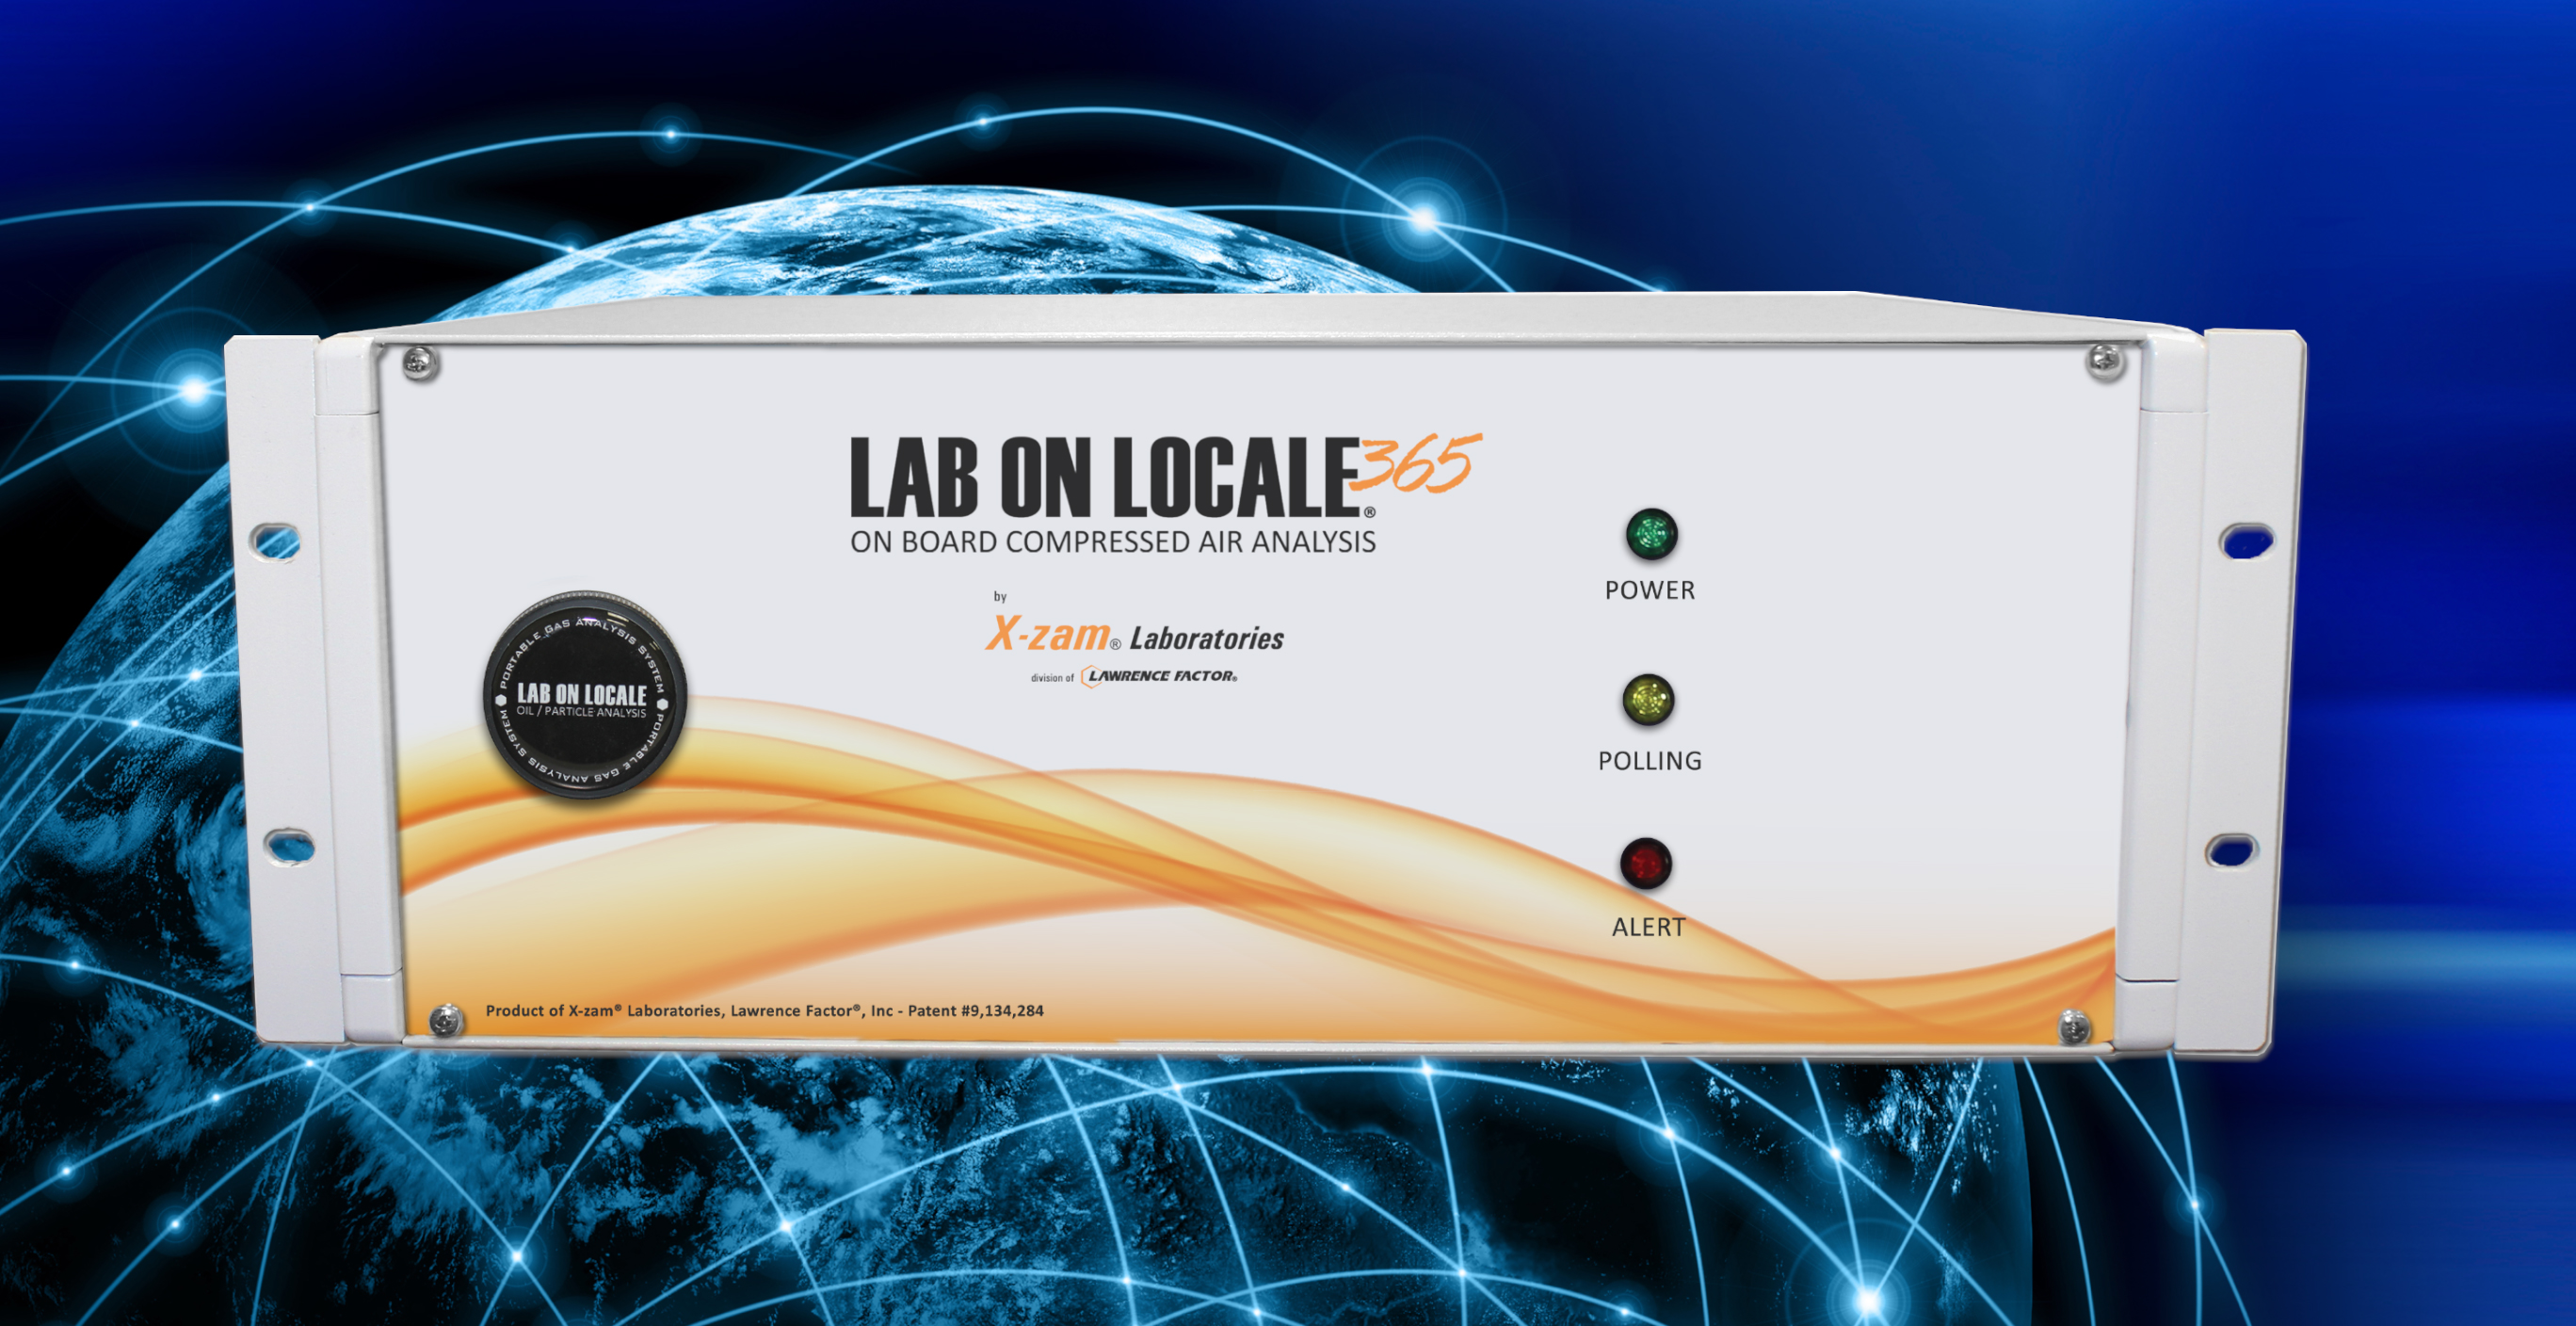 Lab On Locale 365